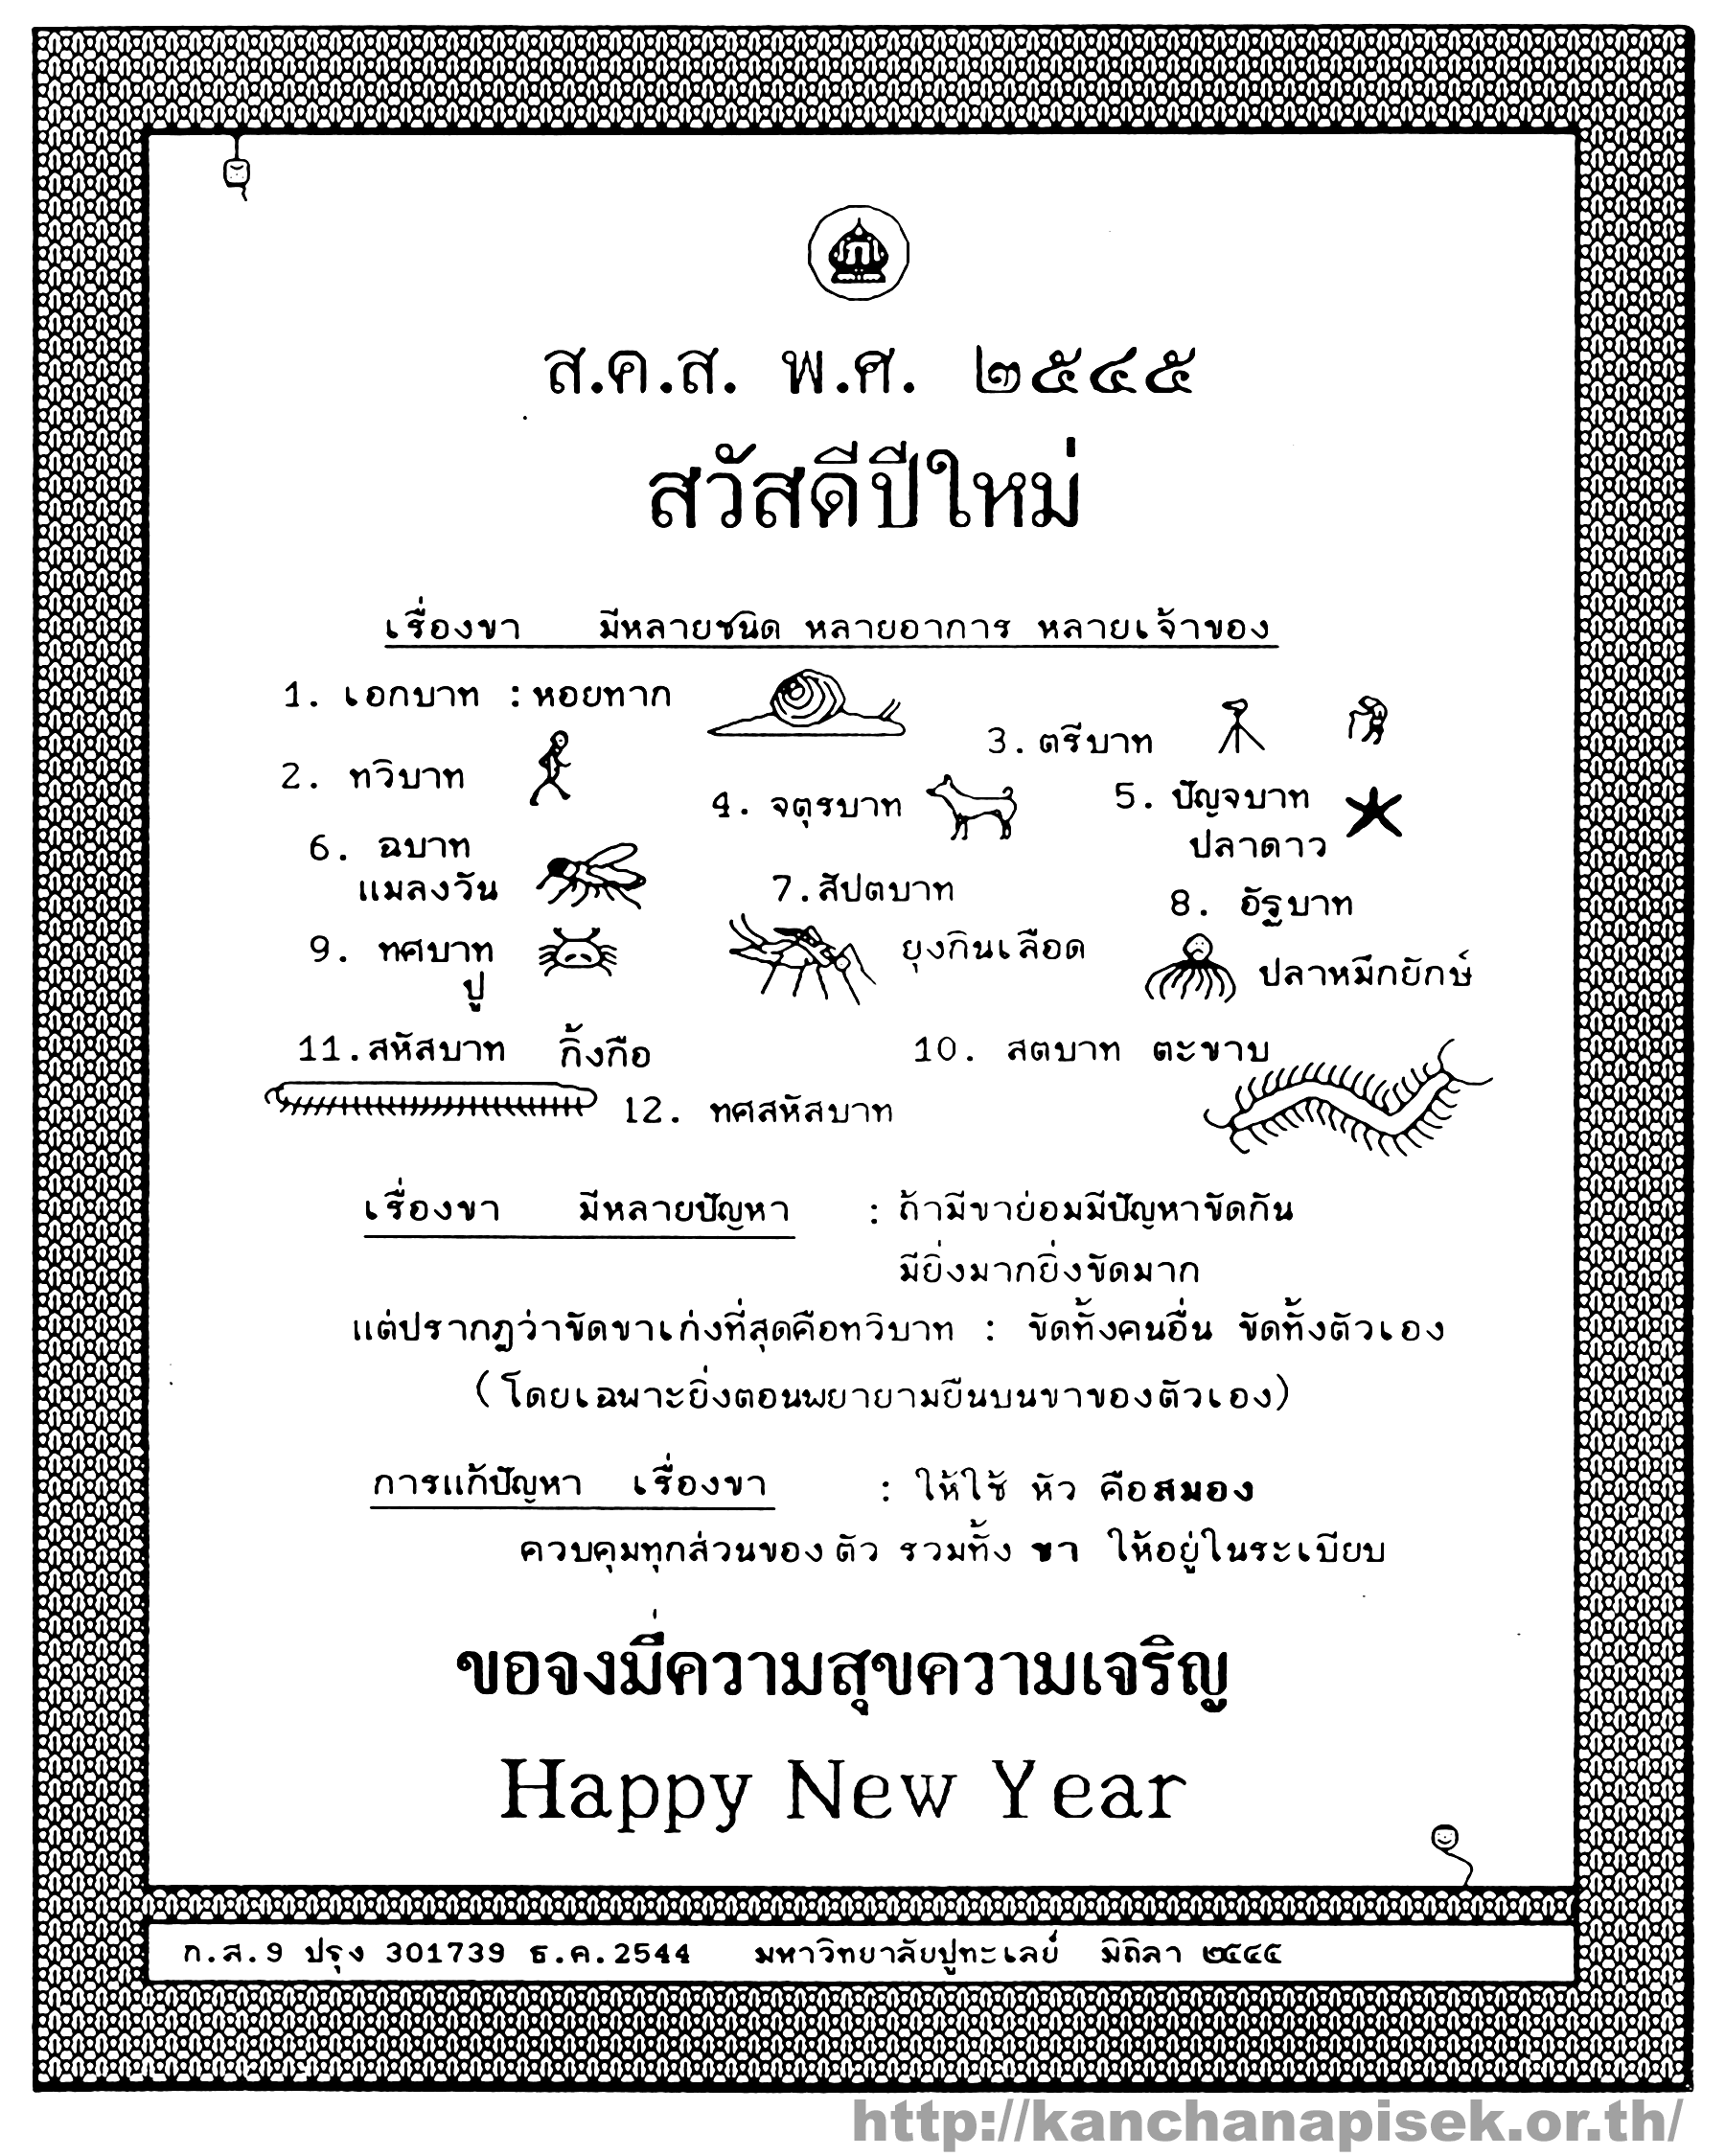 the new year card, 1800 pixels, 325KB.